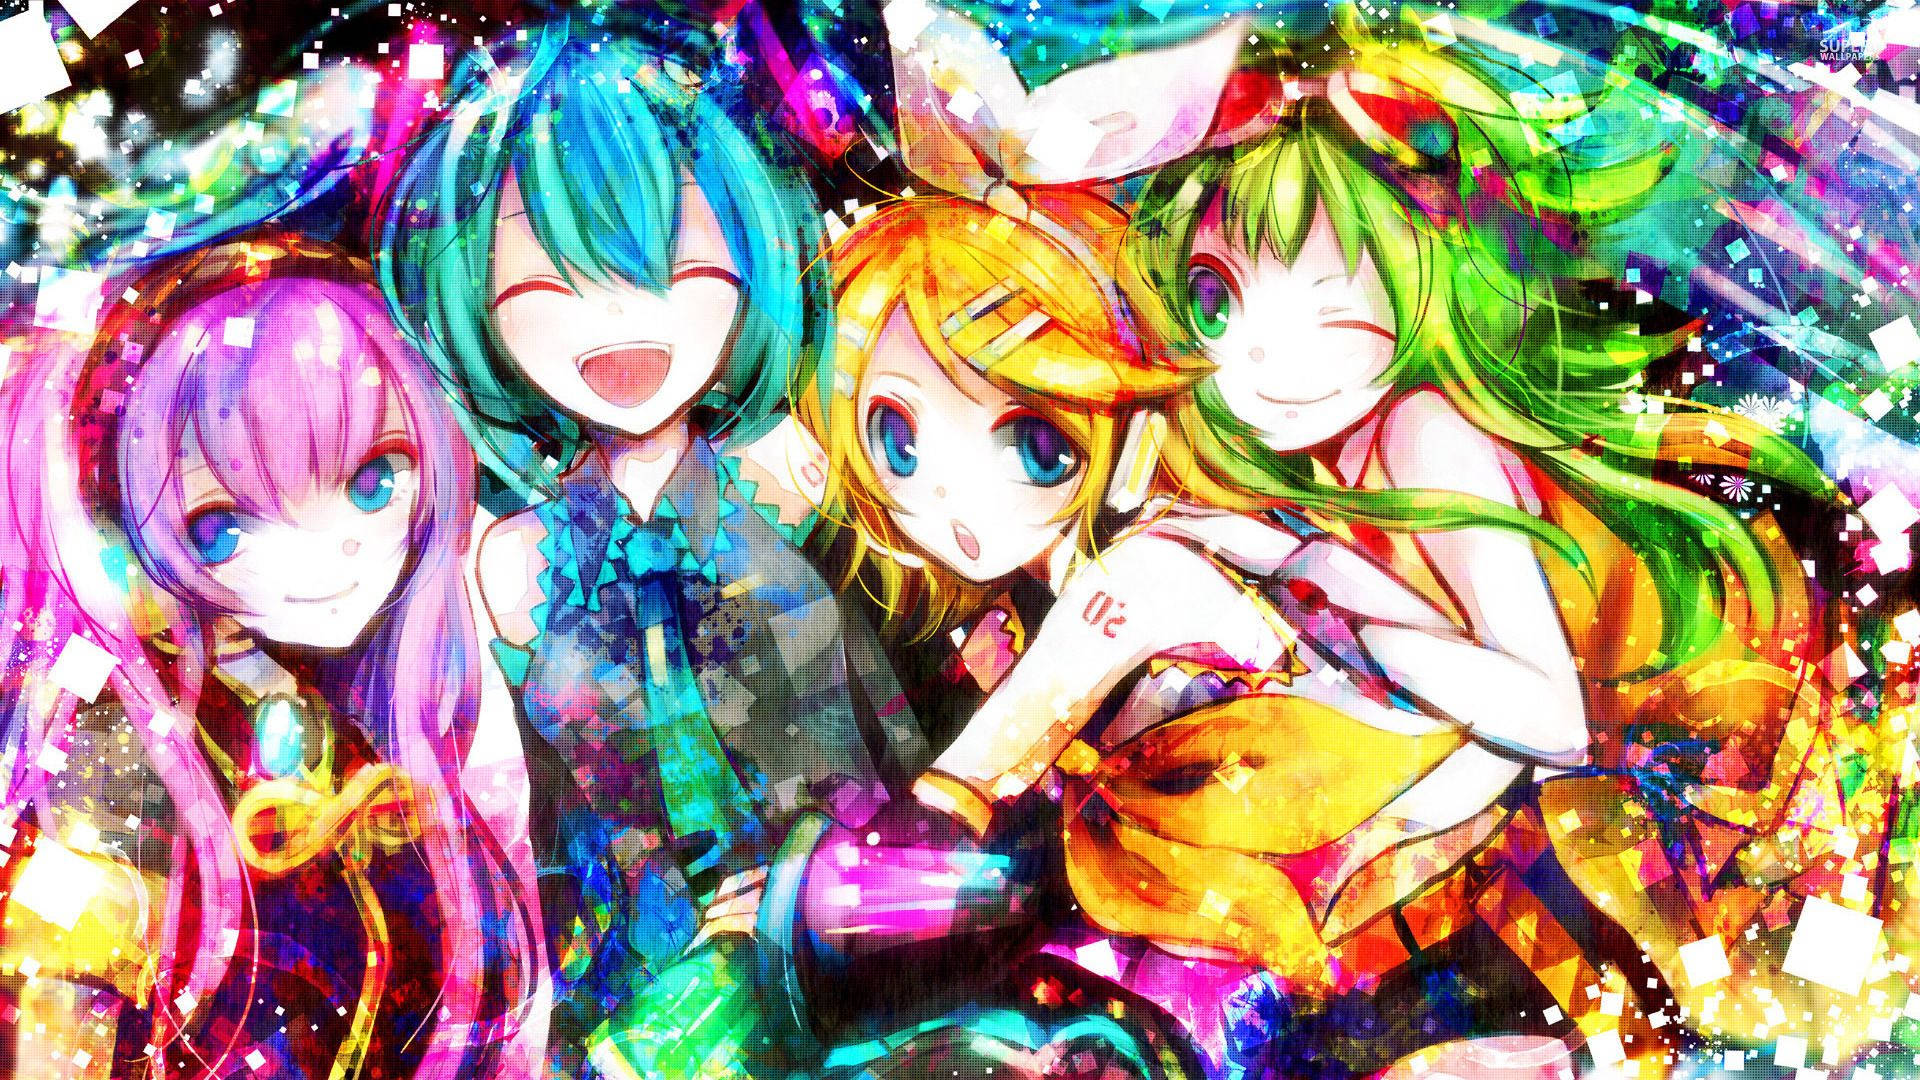 "Feel the Music with the Magical Vocaloid" Wallpaper